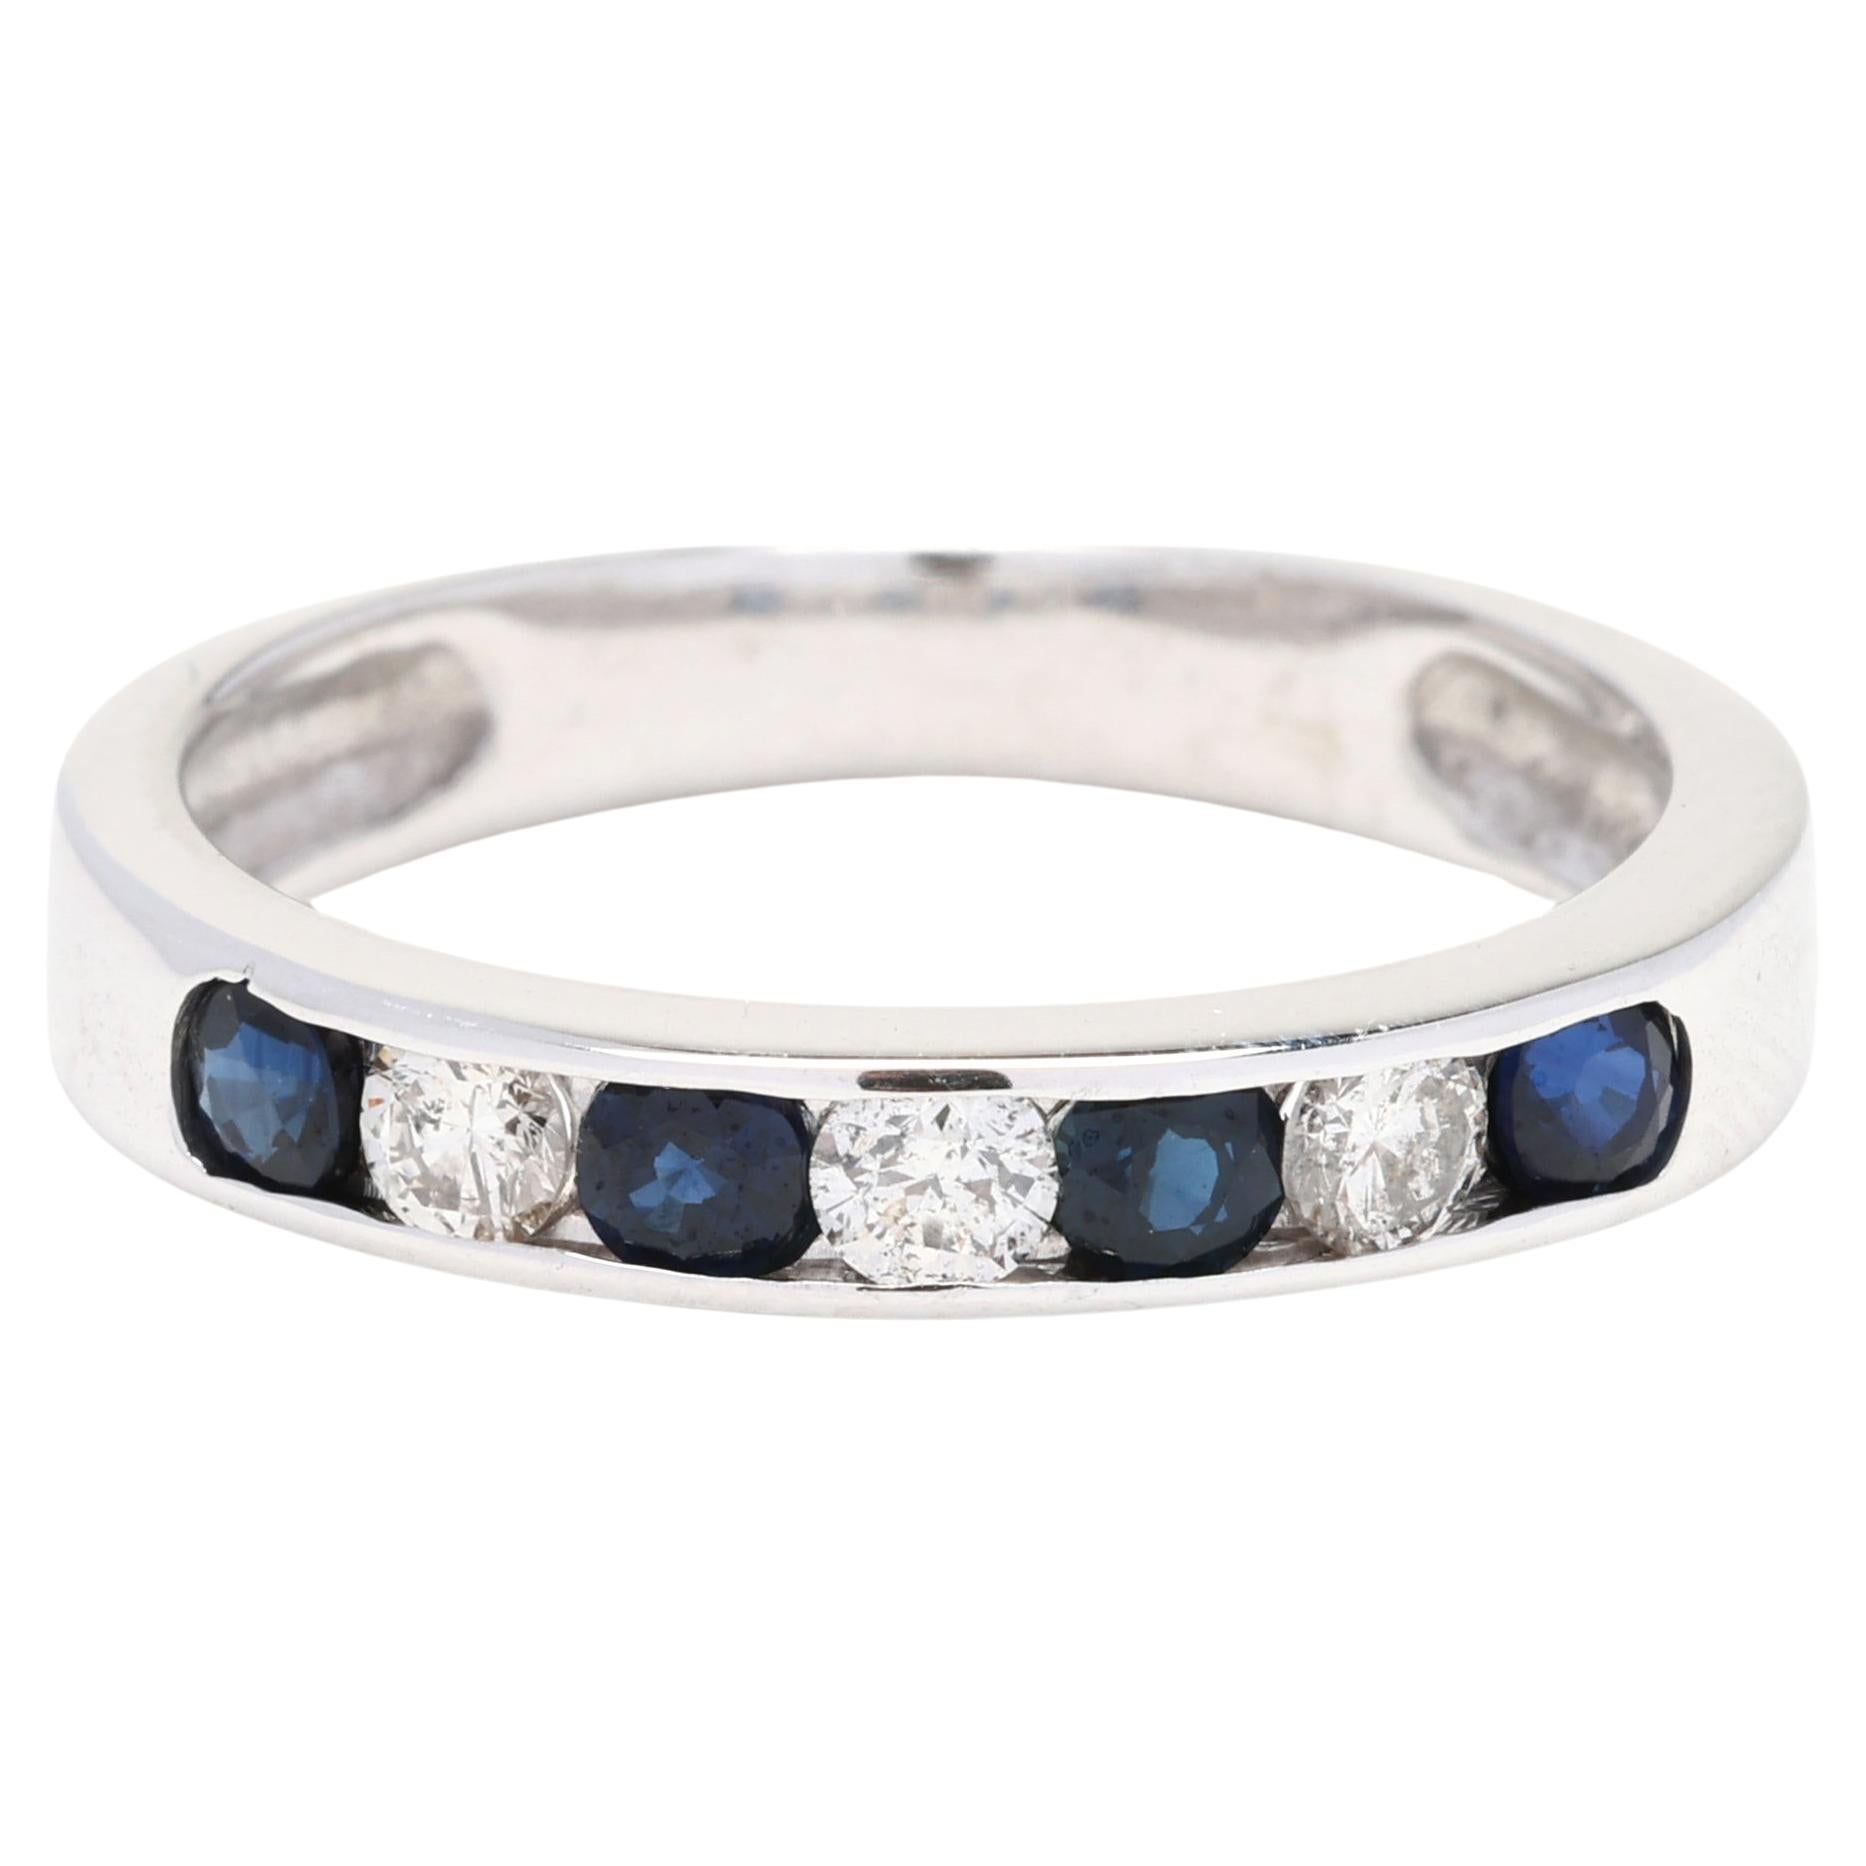 0.50ctw Diamond and Sapphire Band Ring, 14K White Gold, Ring Size 5, Stackable